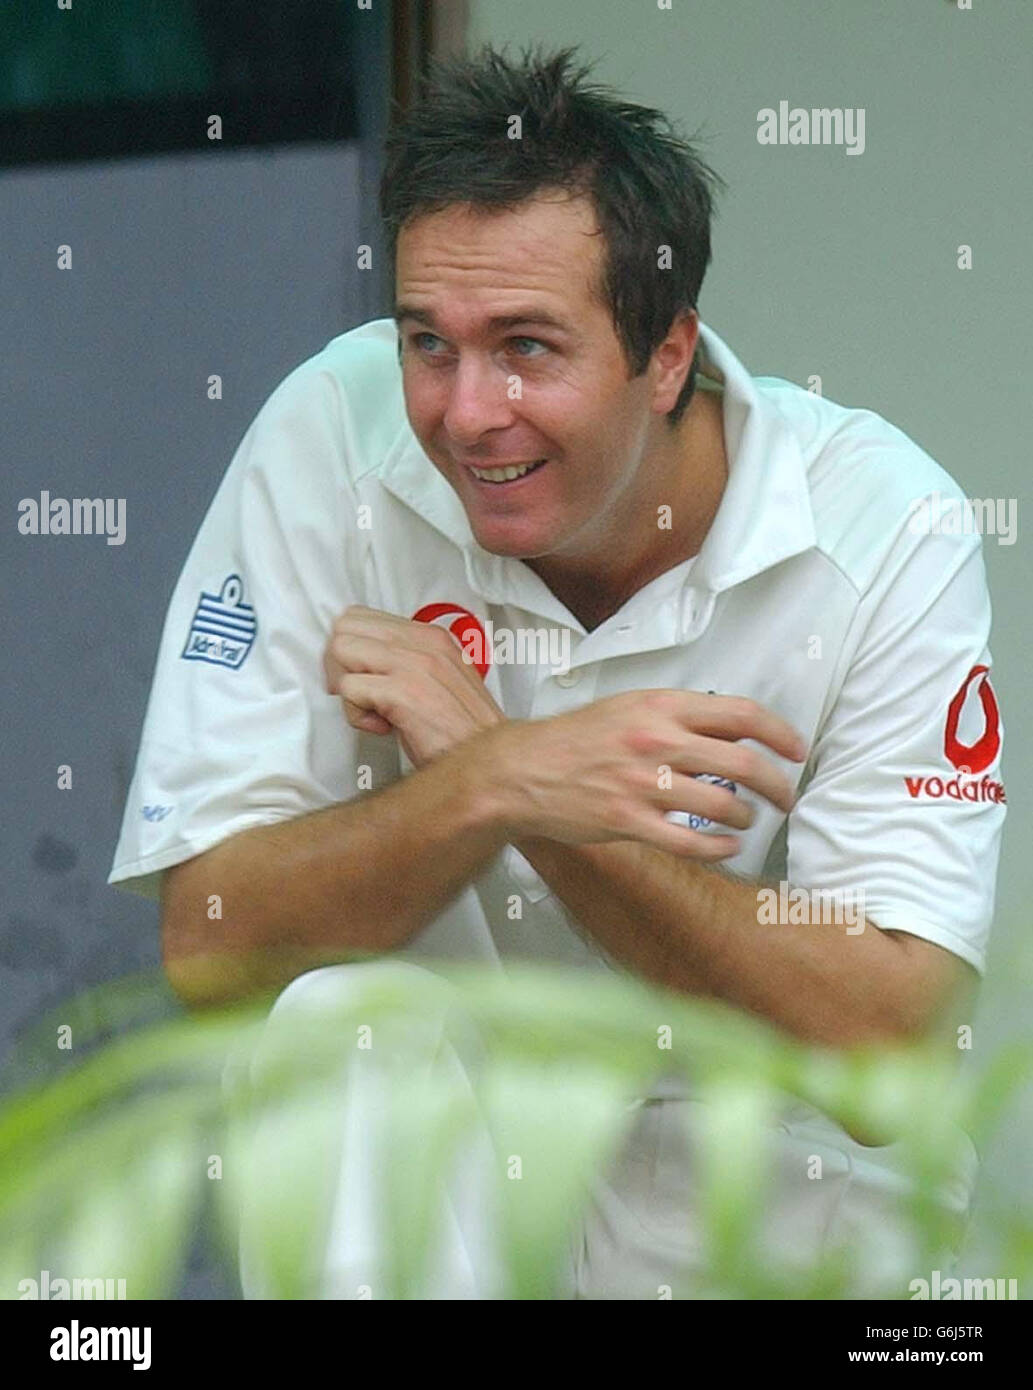 England Captain Michael Vaughan takes cover in the dressing room at the Bangabandhu Stadium in Dhaka, after play in the inaugural Test between England and Bangladesh was halted after less than 20 minutes by torrential rain. Bangladesh had faced only four overs after winning the toss and deciding to bat and had reached one without loss when the storms broke over the ground and sent the players scurrying for the dressing rooms. Stock Photo